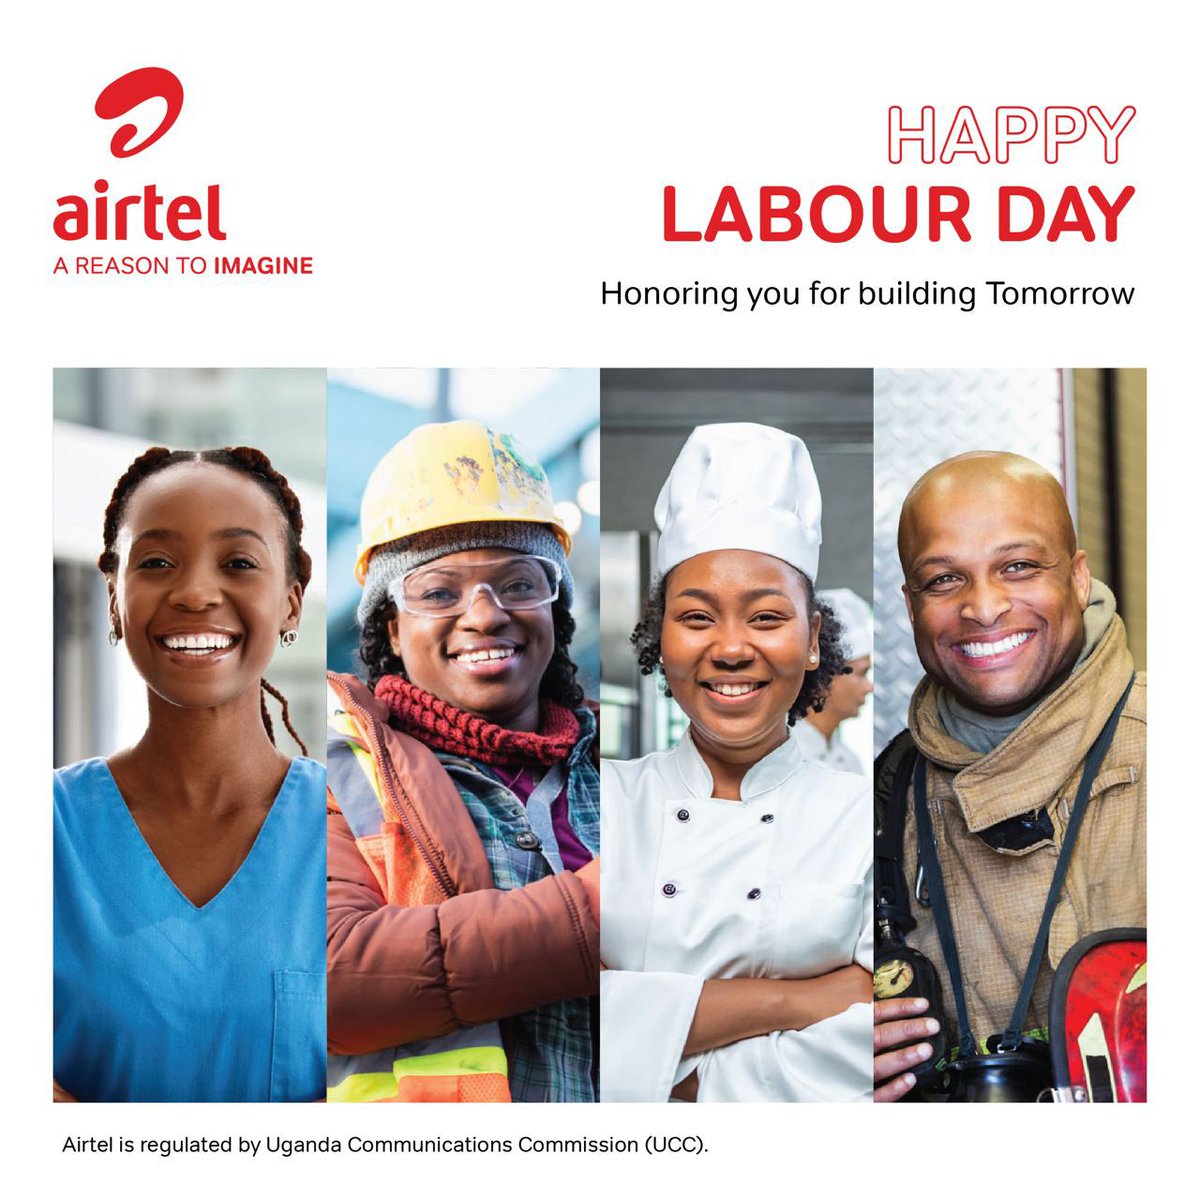 Happy Labour Day from @Airtel_Ug! Celebrating the dedication and achievements of workers everywhere. Enjoy the day! #AirtelCares